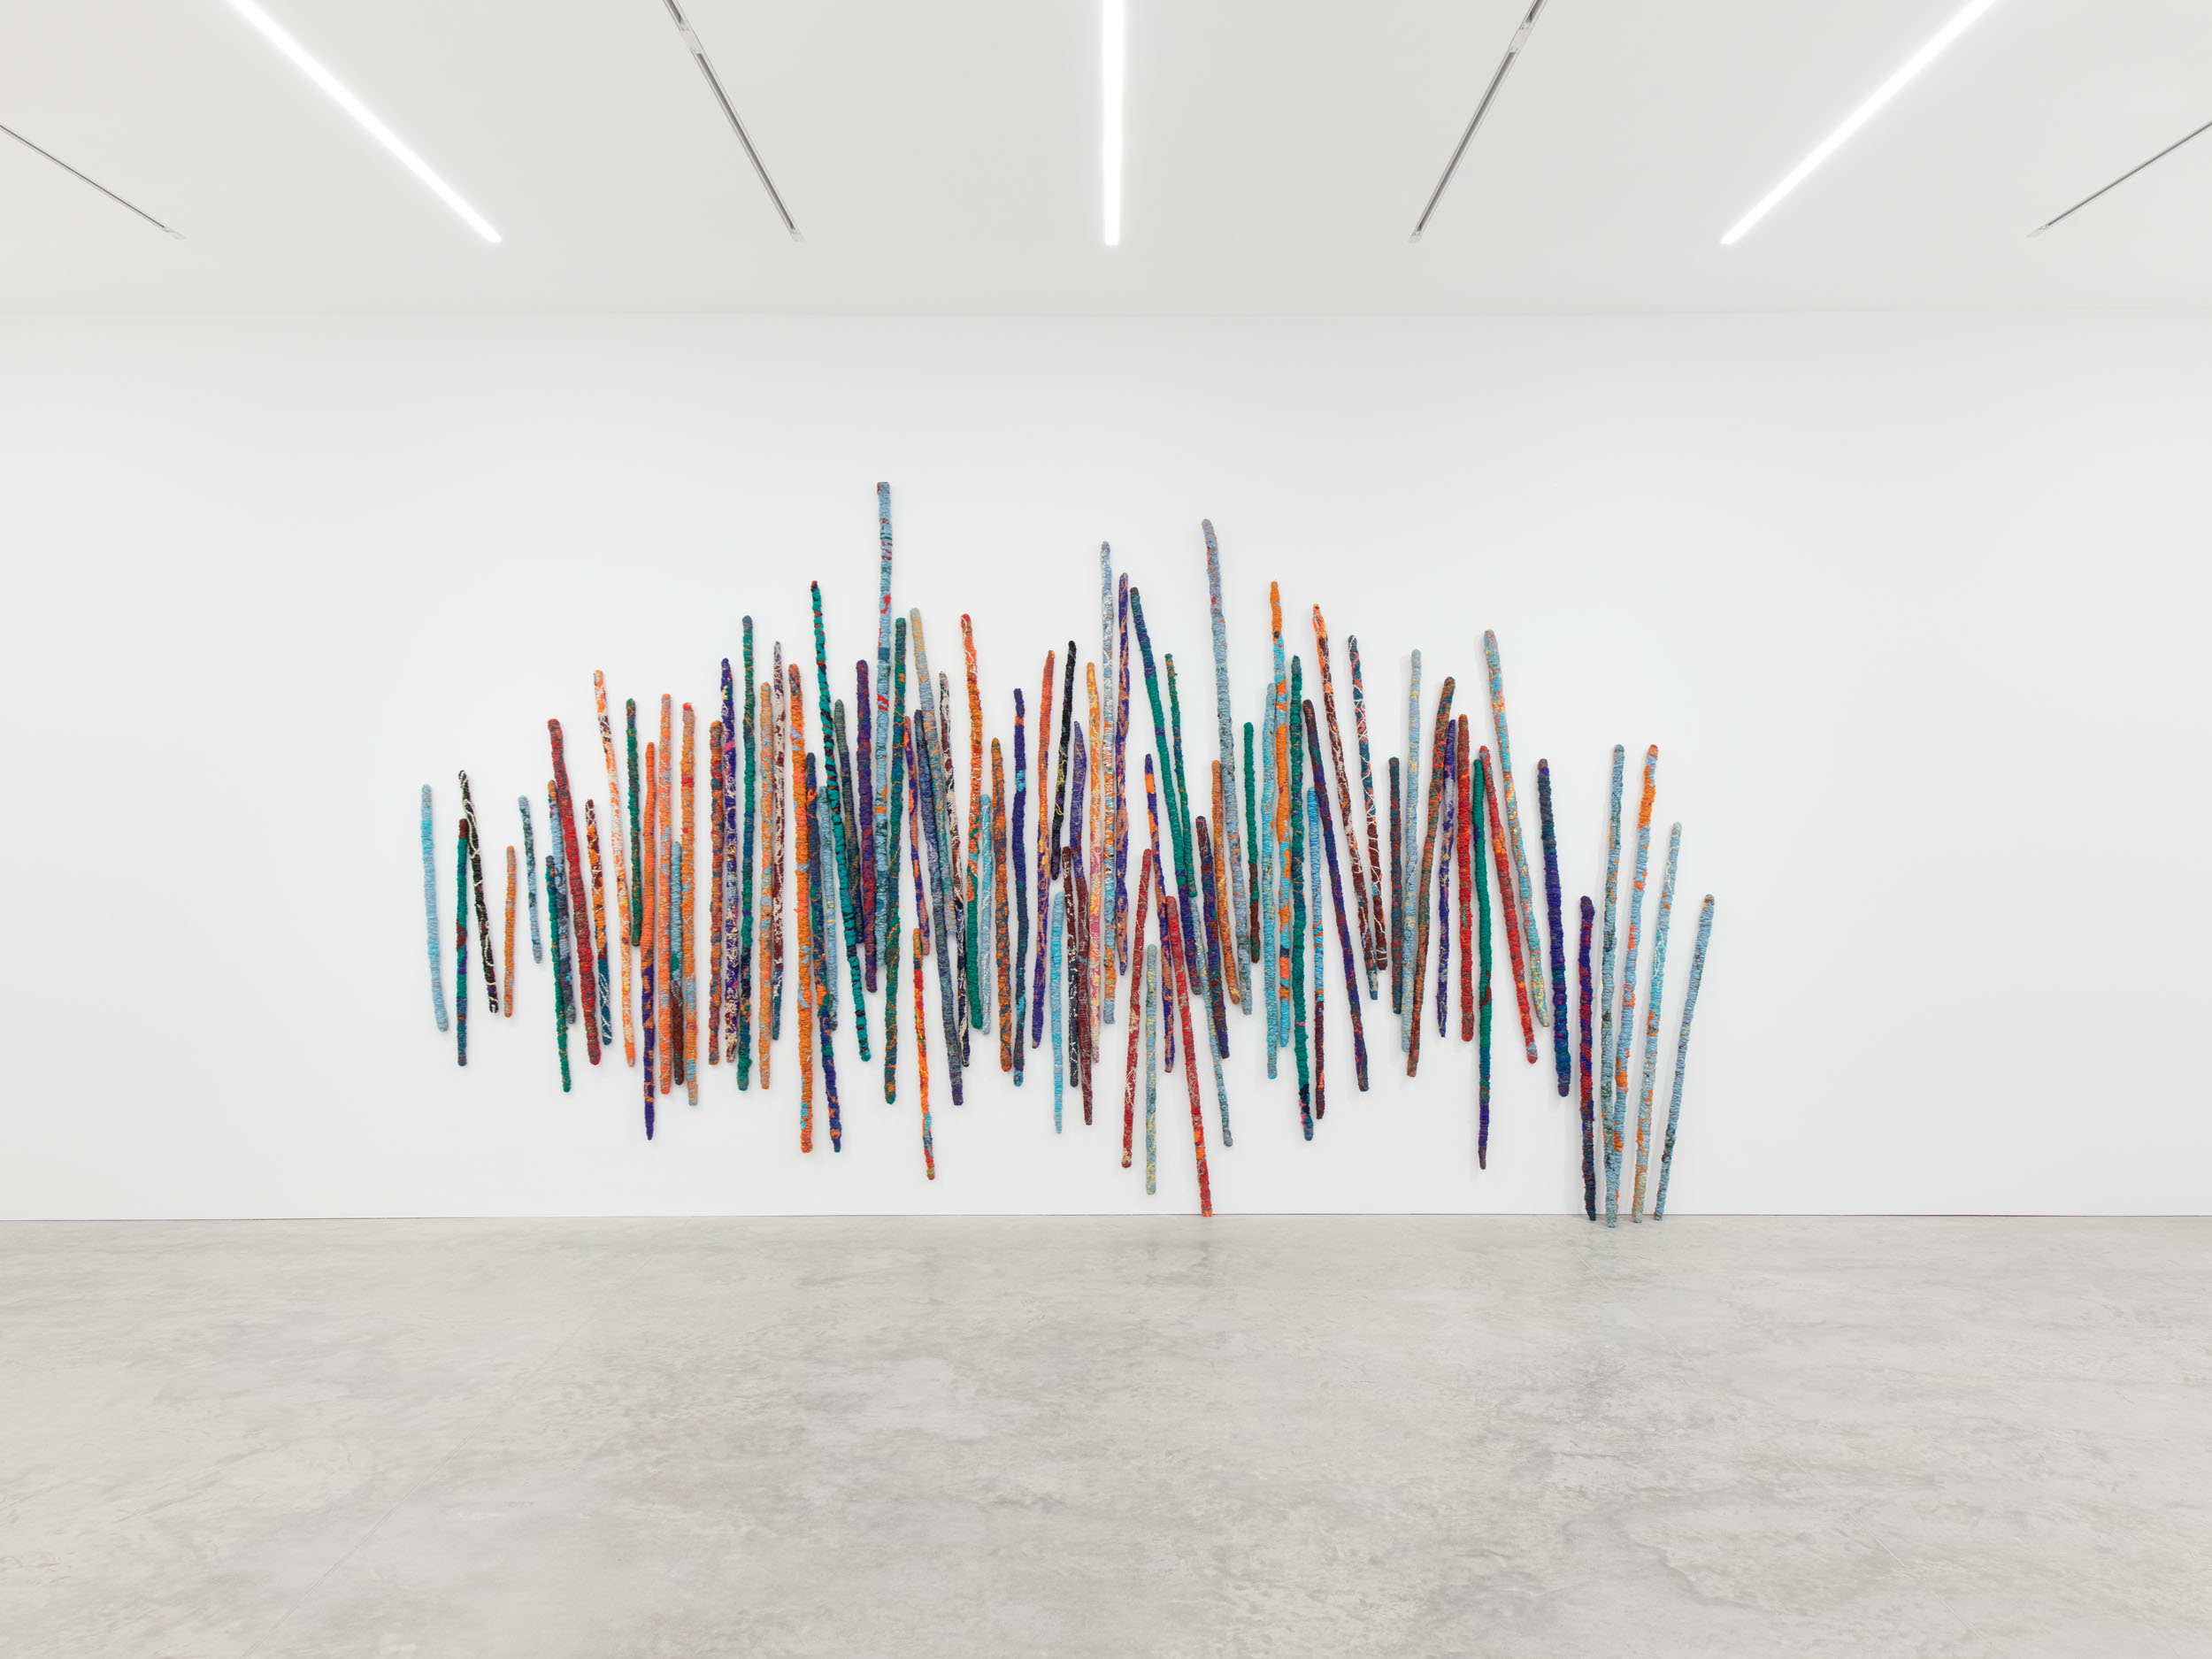 Installation image for Sheila Hicks: Infinite Potential, at Alison Jacques